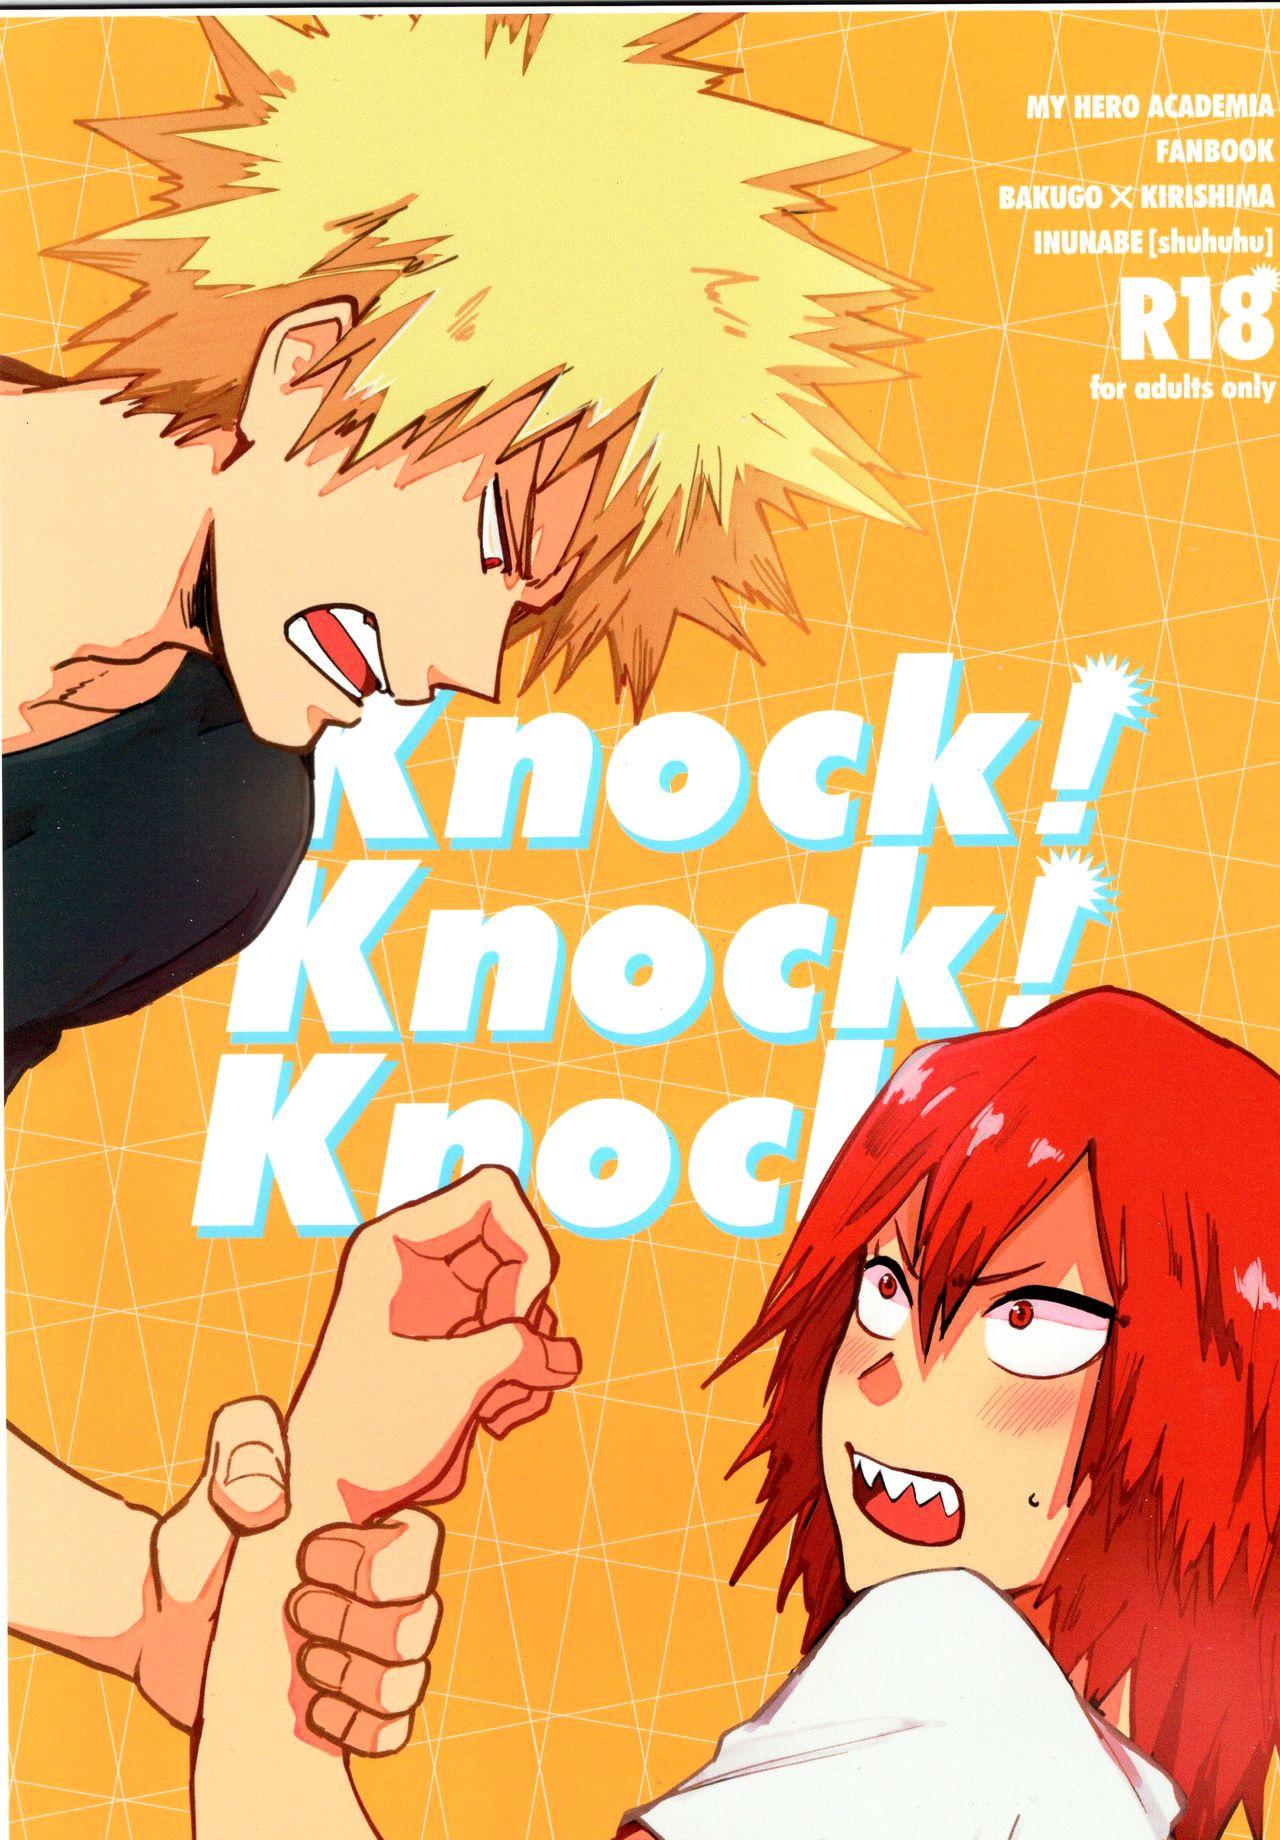 Show Knock! Knock! Knock! - My hero academia Whipping - Page 1